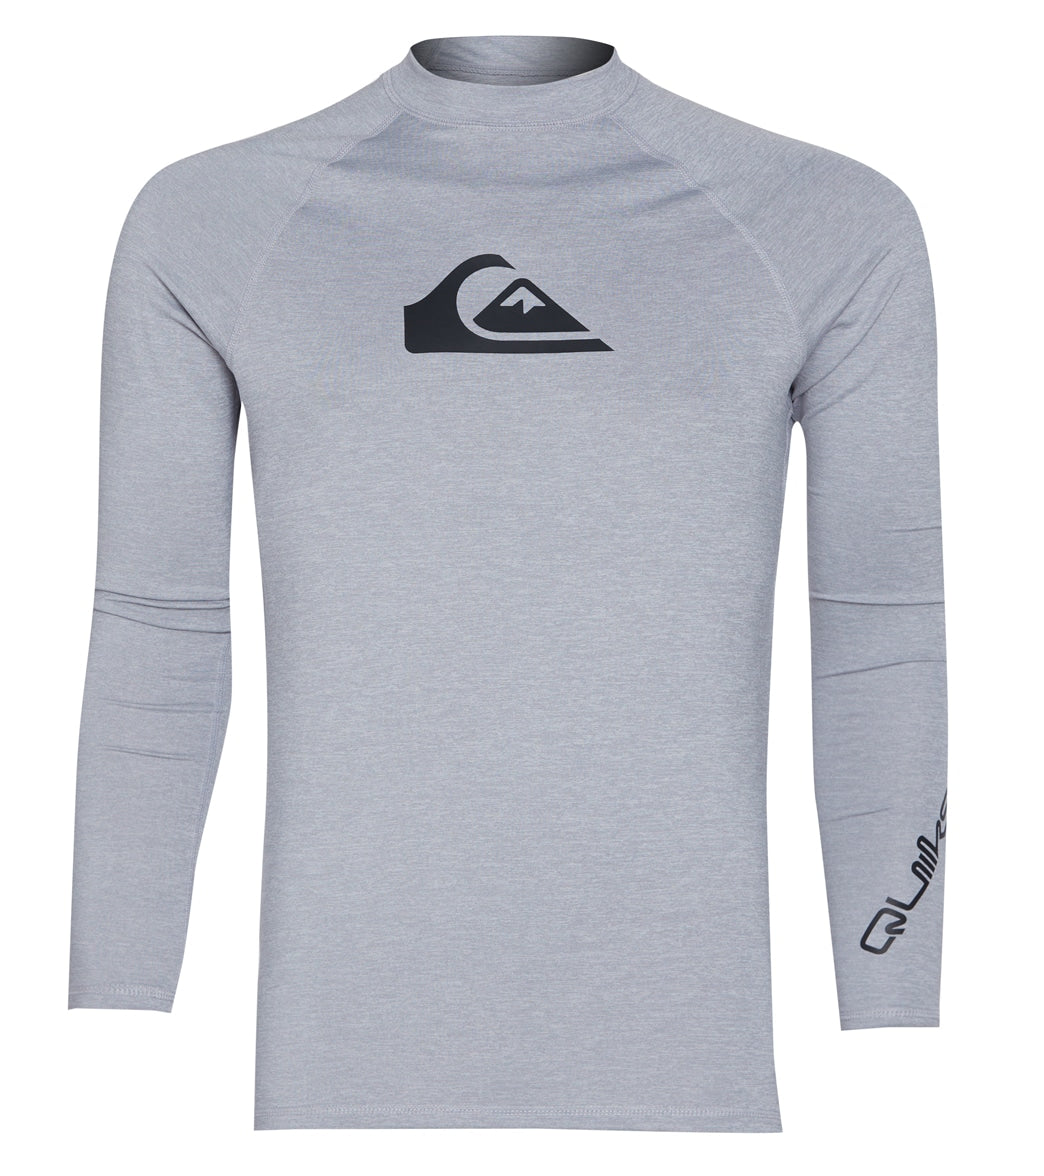 Quiksilver Men's All Time Long Sleeve UPF 50 Rash Guard at SwimOutlet.com